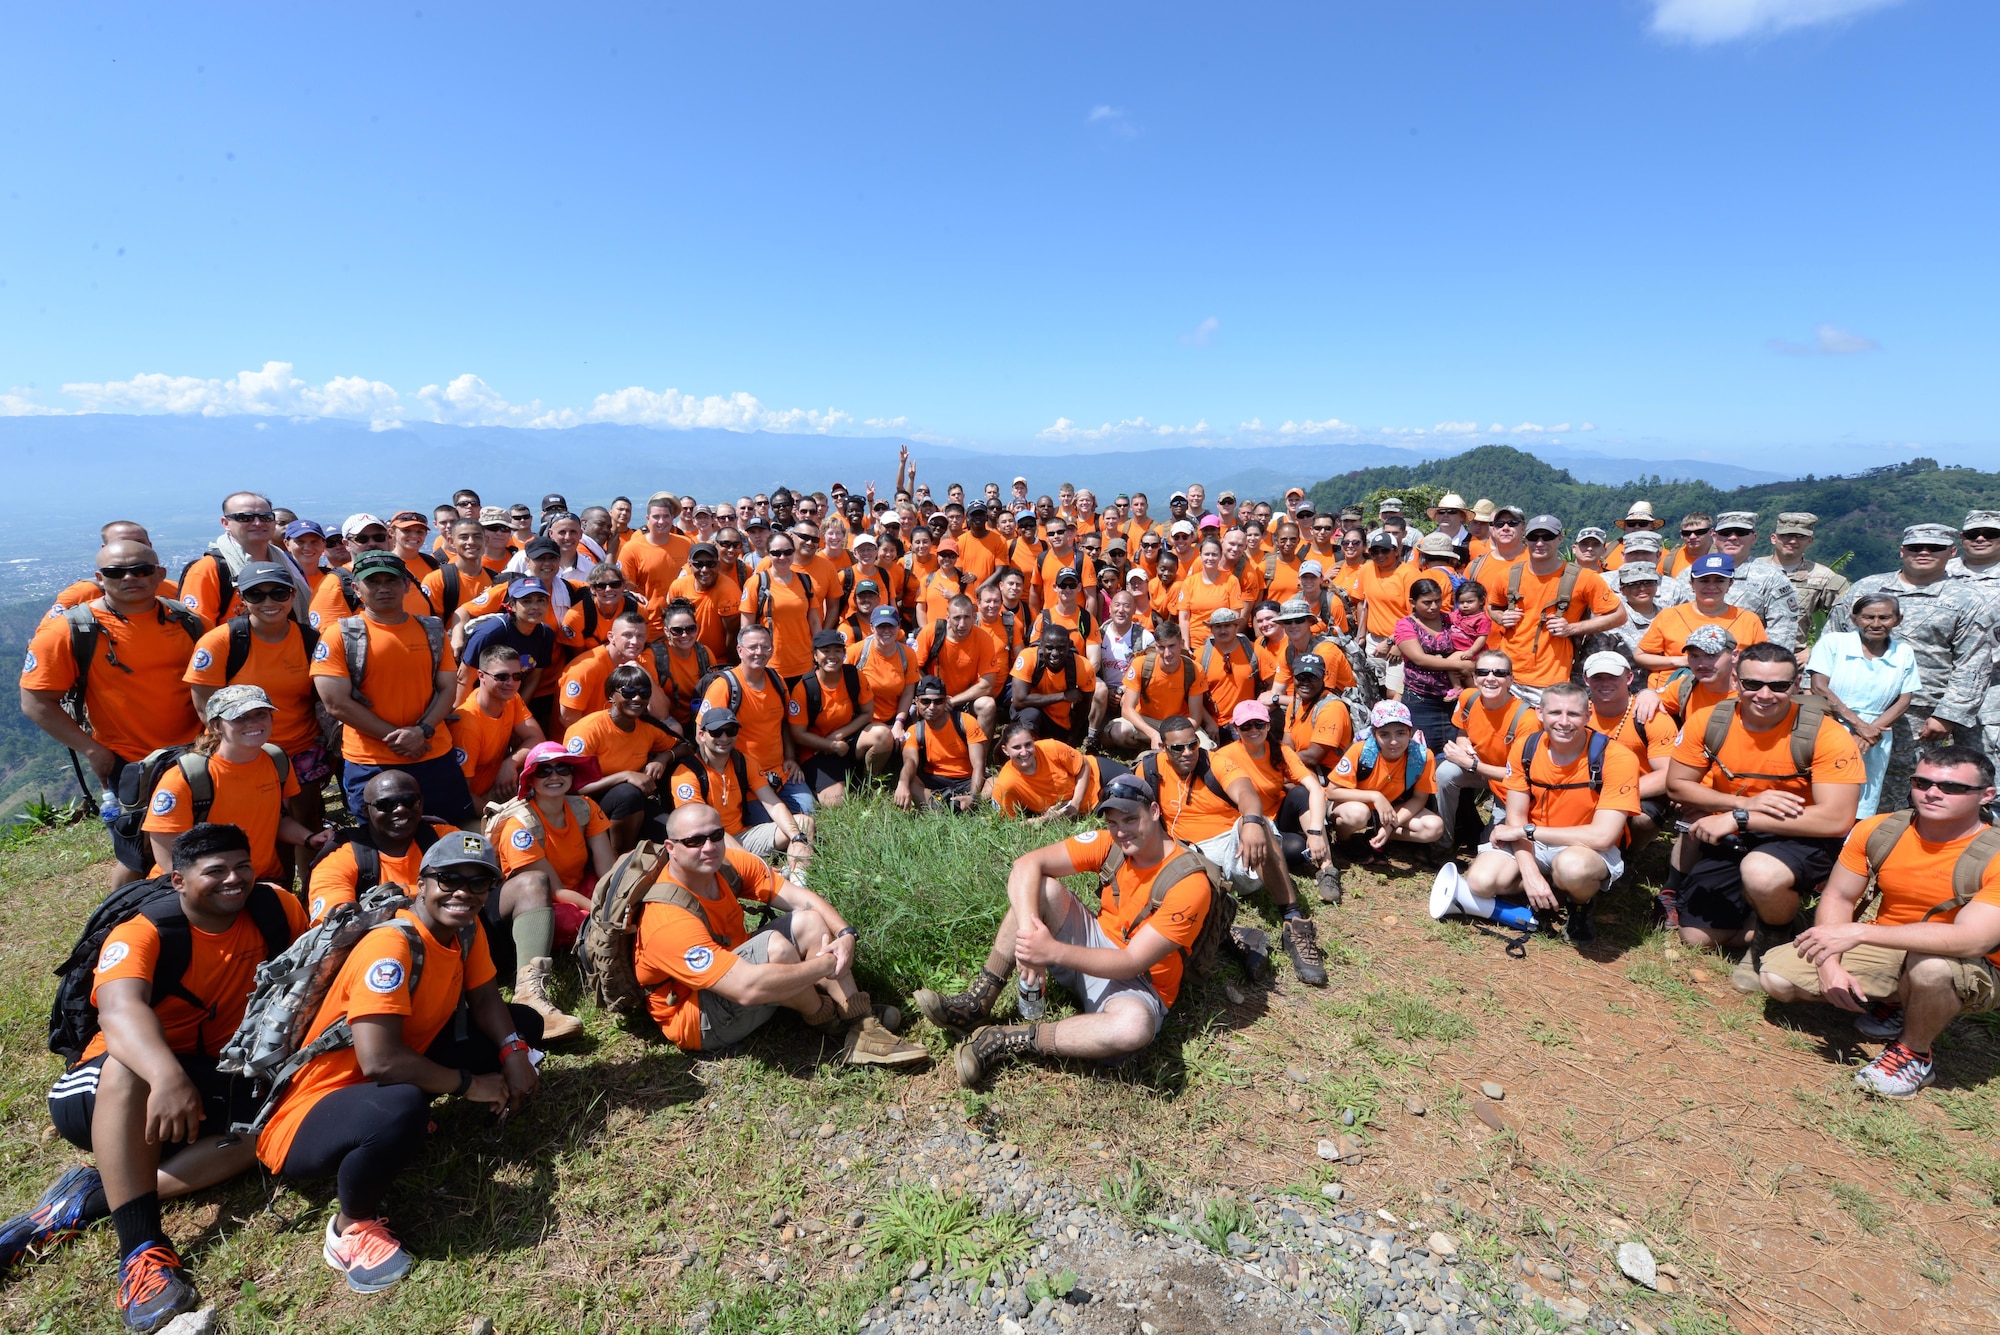 U.S. military members based out of Soto Cano Air Base, Honduras, take a break and pose for a photo, during Chapel Hike 64, Oct. 31, 2015. Chapel Hikes take place every six weeks and provide community outreach by bringing much needed food and supplies to the less fortunate. (U.S. Air Force photo by Senior Airman Westin Warburton)